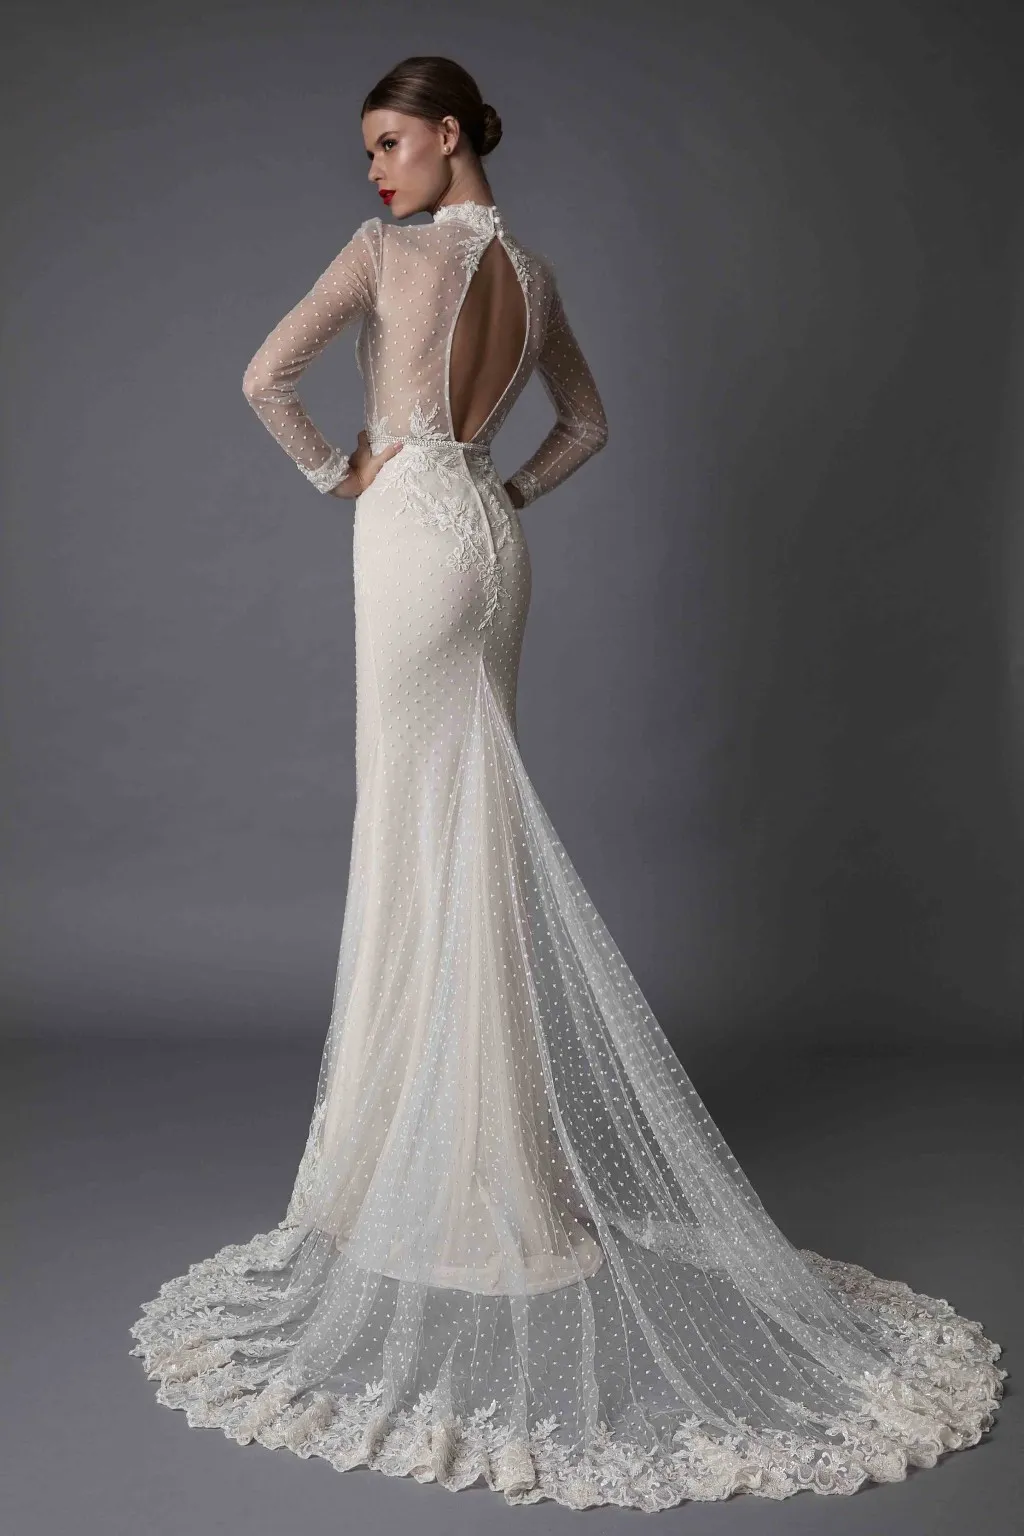 Berta Mermaid Long Sleeve Wedding Dresses Lace Applique High Neck Beads Hollow Back Sexy Illusion Fishtail 2020 Bridal Gowns